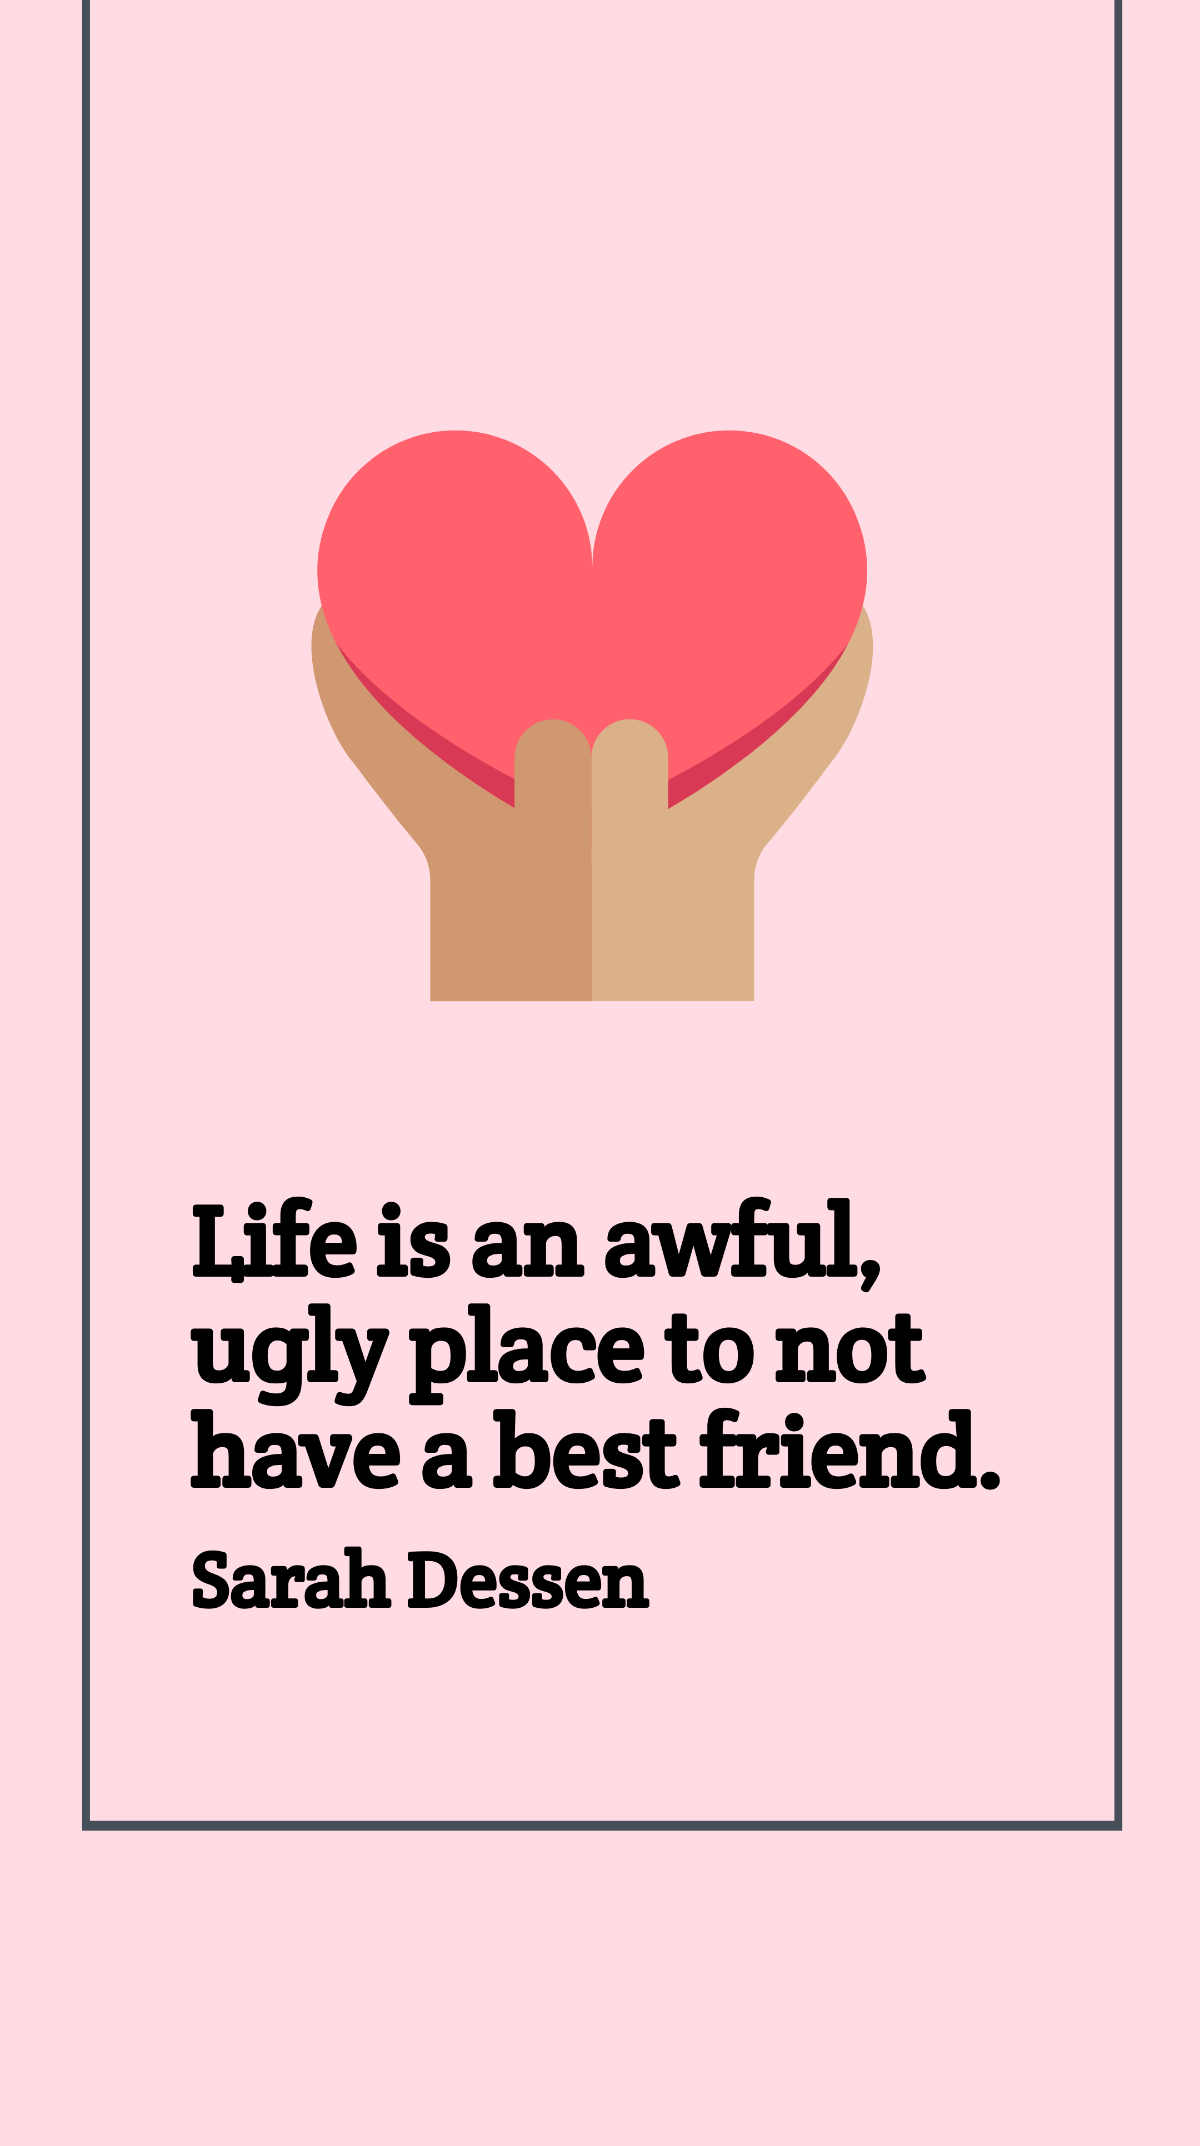 Sarah Dessen - Life is an awful, ugly place to not have a best friend. Template